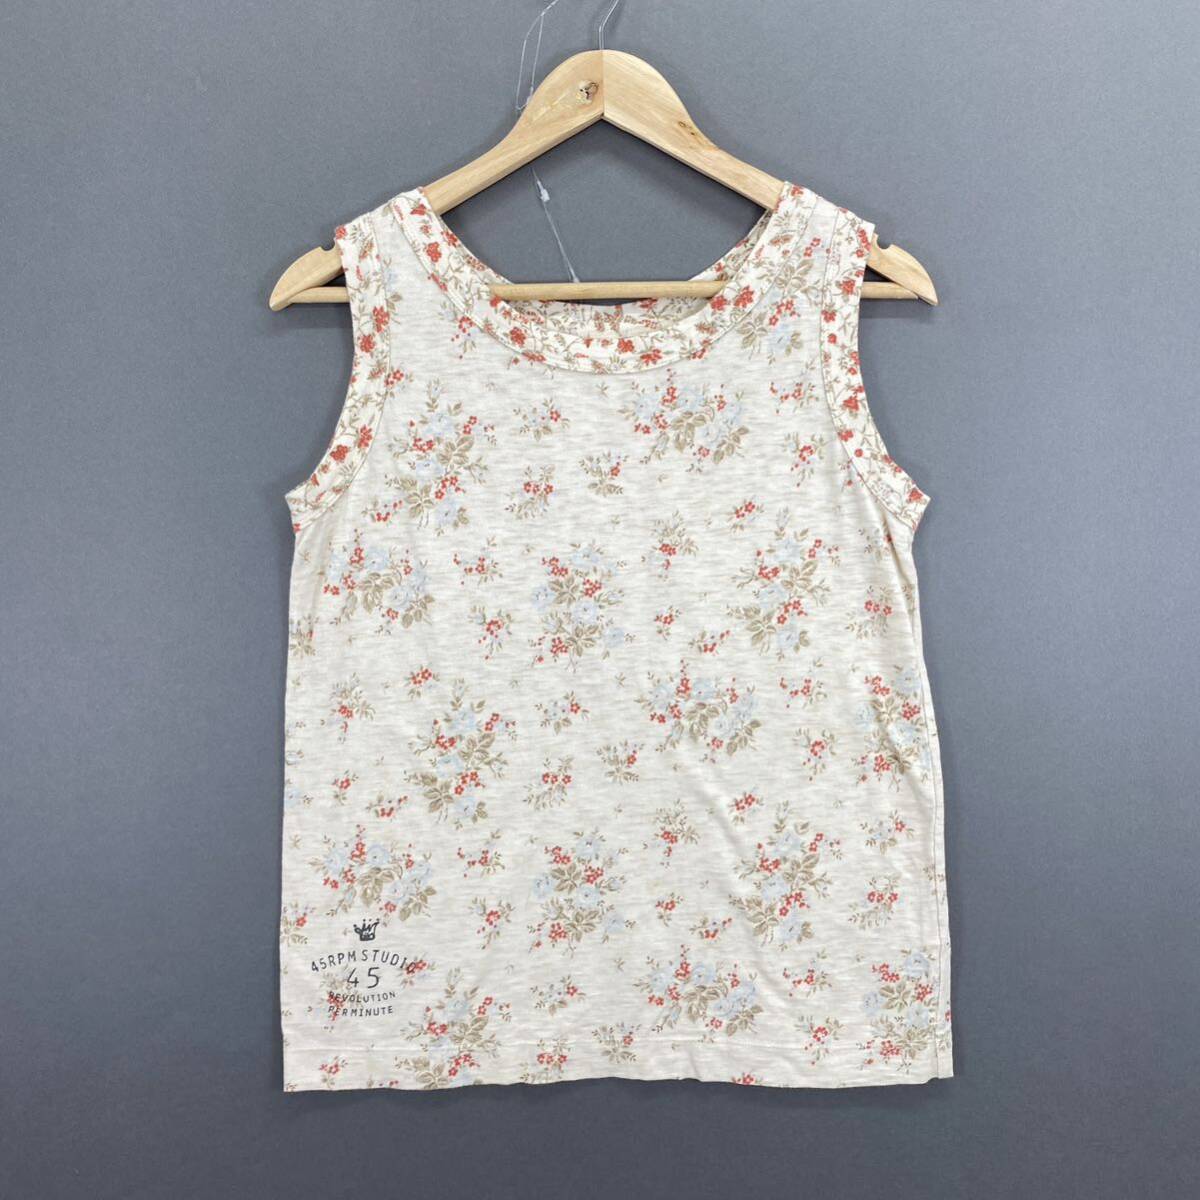 Be17 45rpm four ti five a-rupi- M no sleeve tops tank top floral print total pattern cotton tops lady's woman clothes M